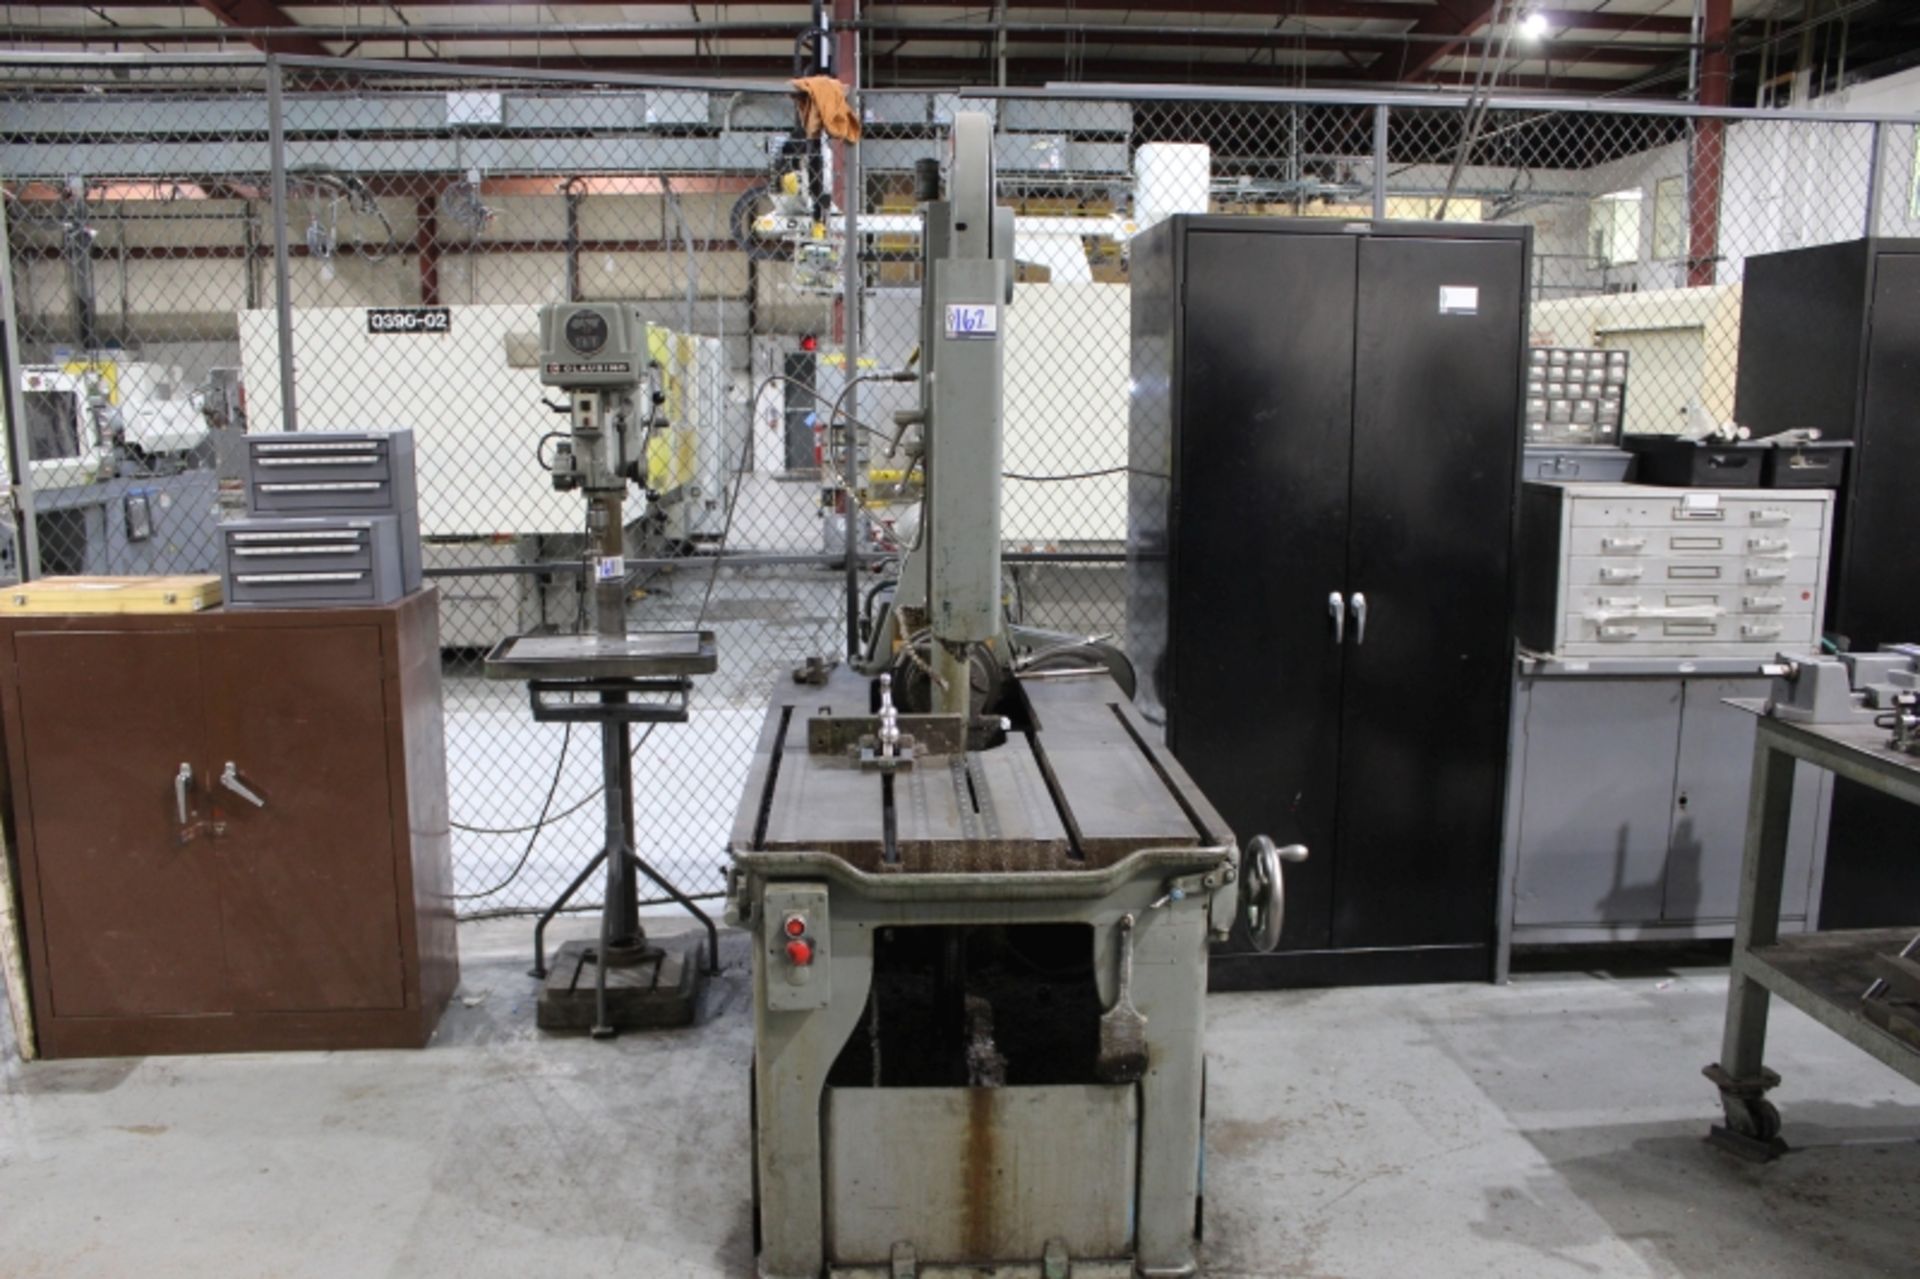 Armstrong-Blum Marvel Mark 8 Vertical Band Saw, S/N 88413